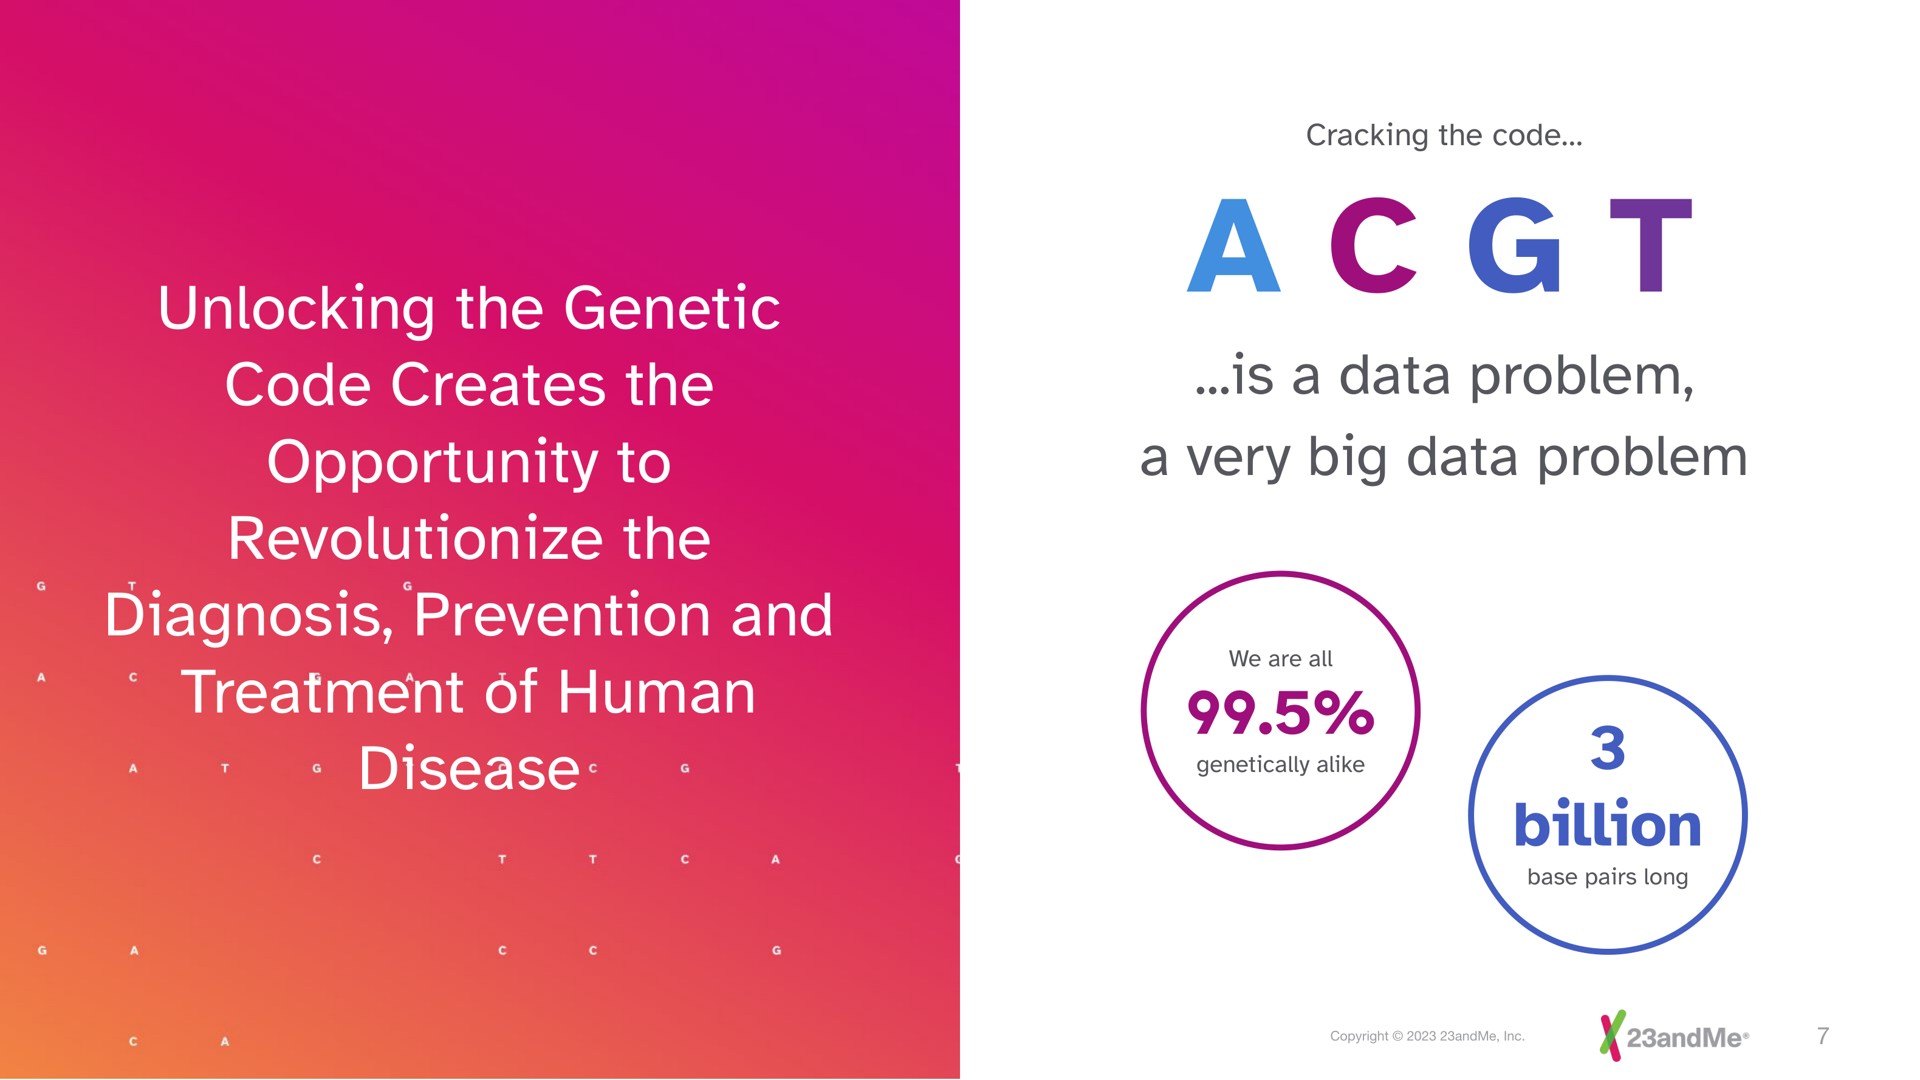 unlocking the genetic code creates the opportunity to revolutionize the diagnosis prevention and treatment of human disease a is a data problem a very big data problem billion | 23andMe